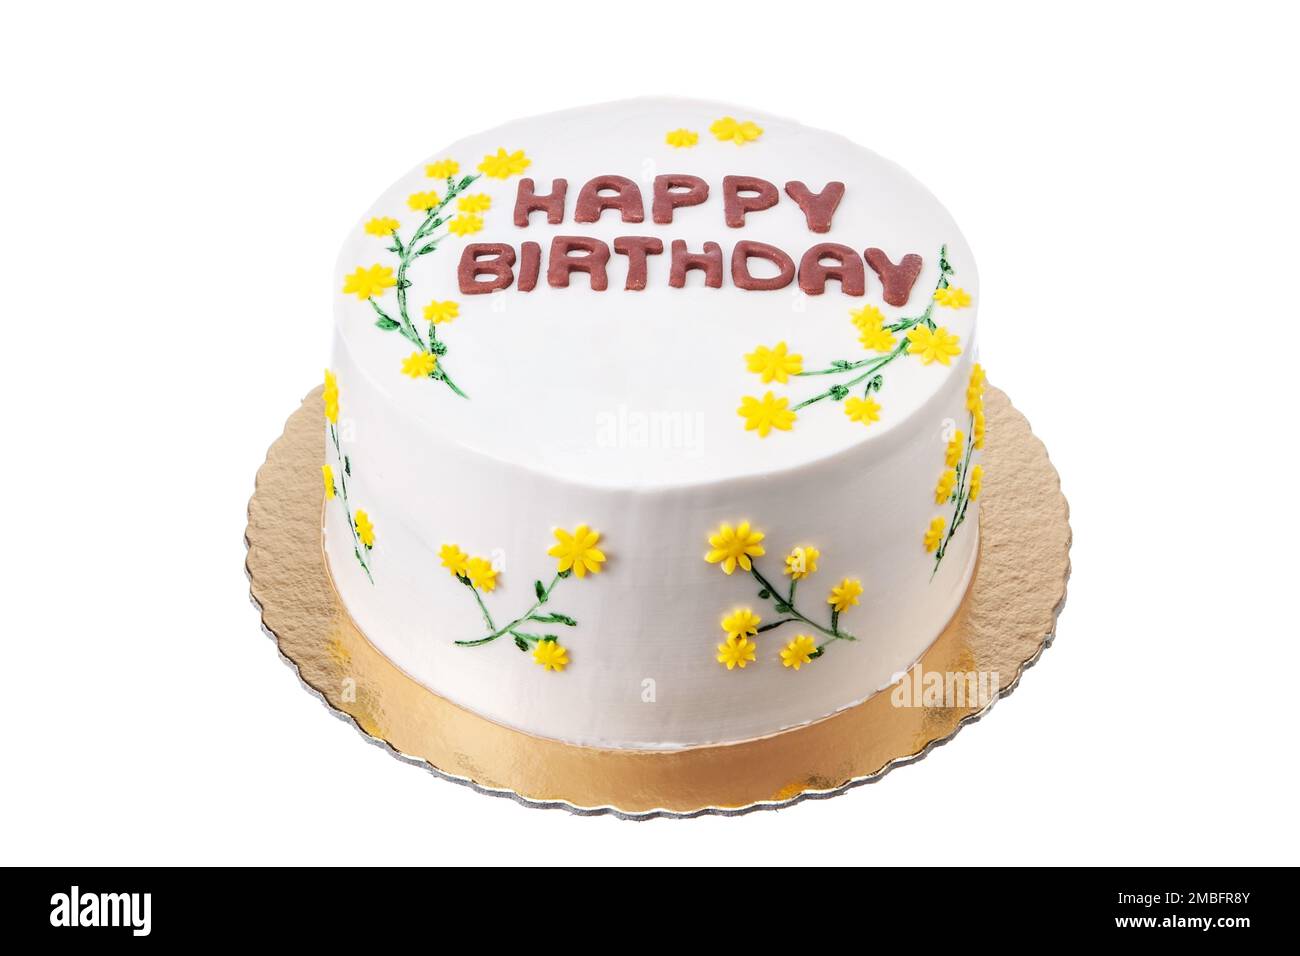 Festive homemade decorative cake with flowers and the inscription Happy Birthday. Stock Photo